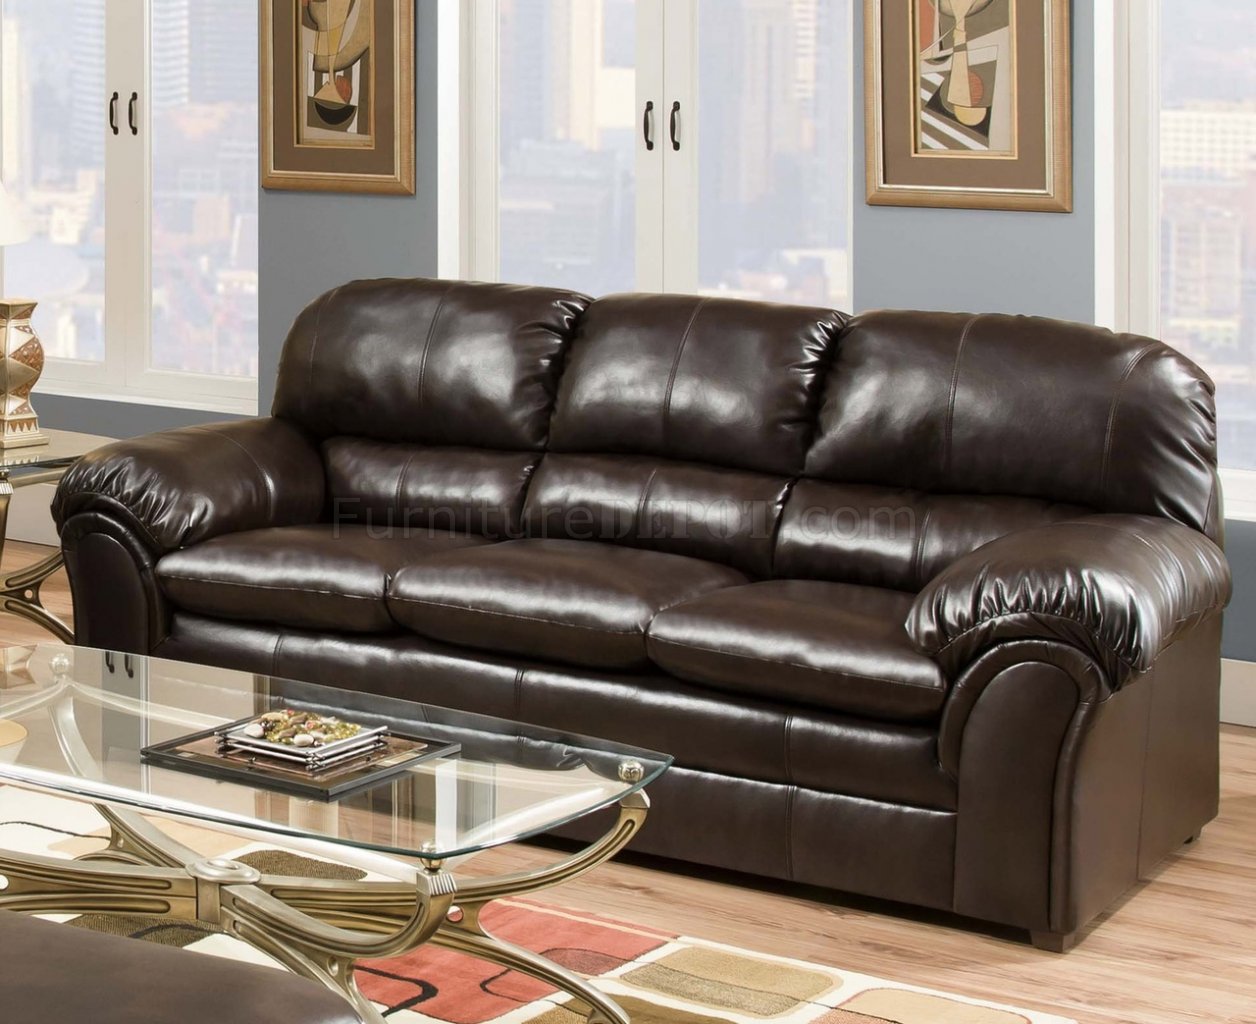 leather sofa and loveseat set